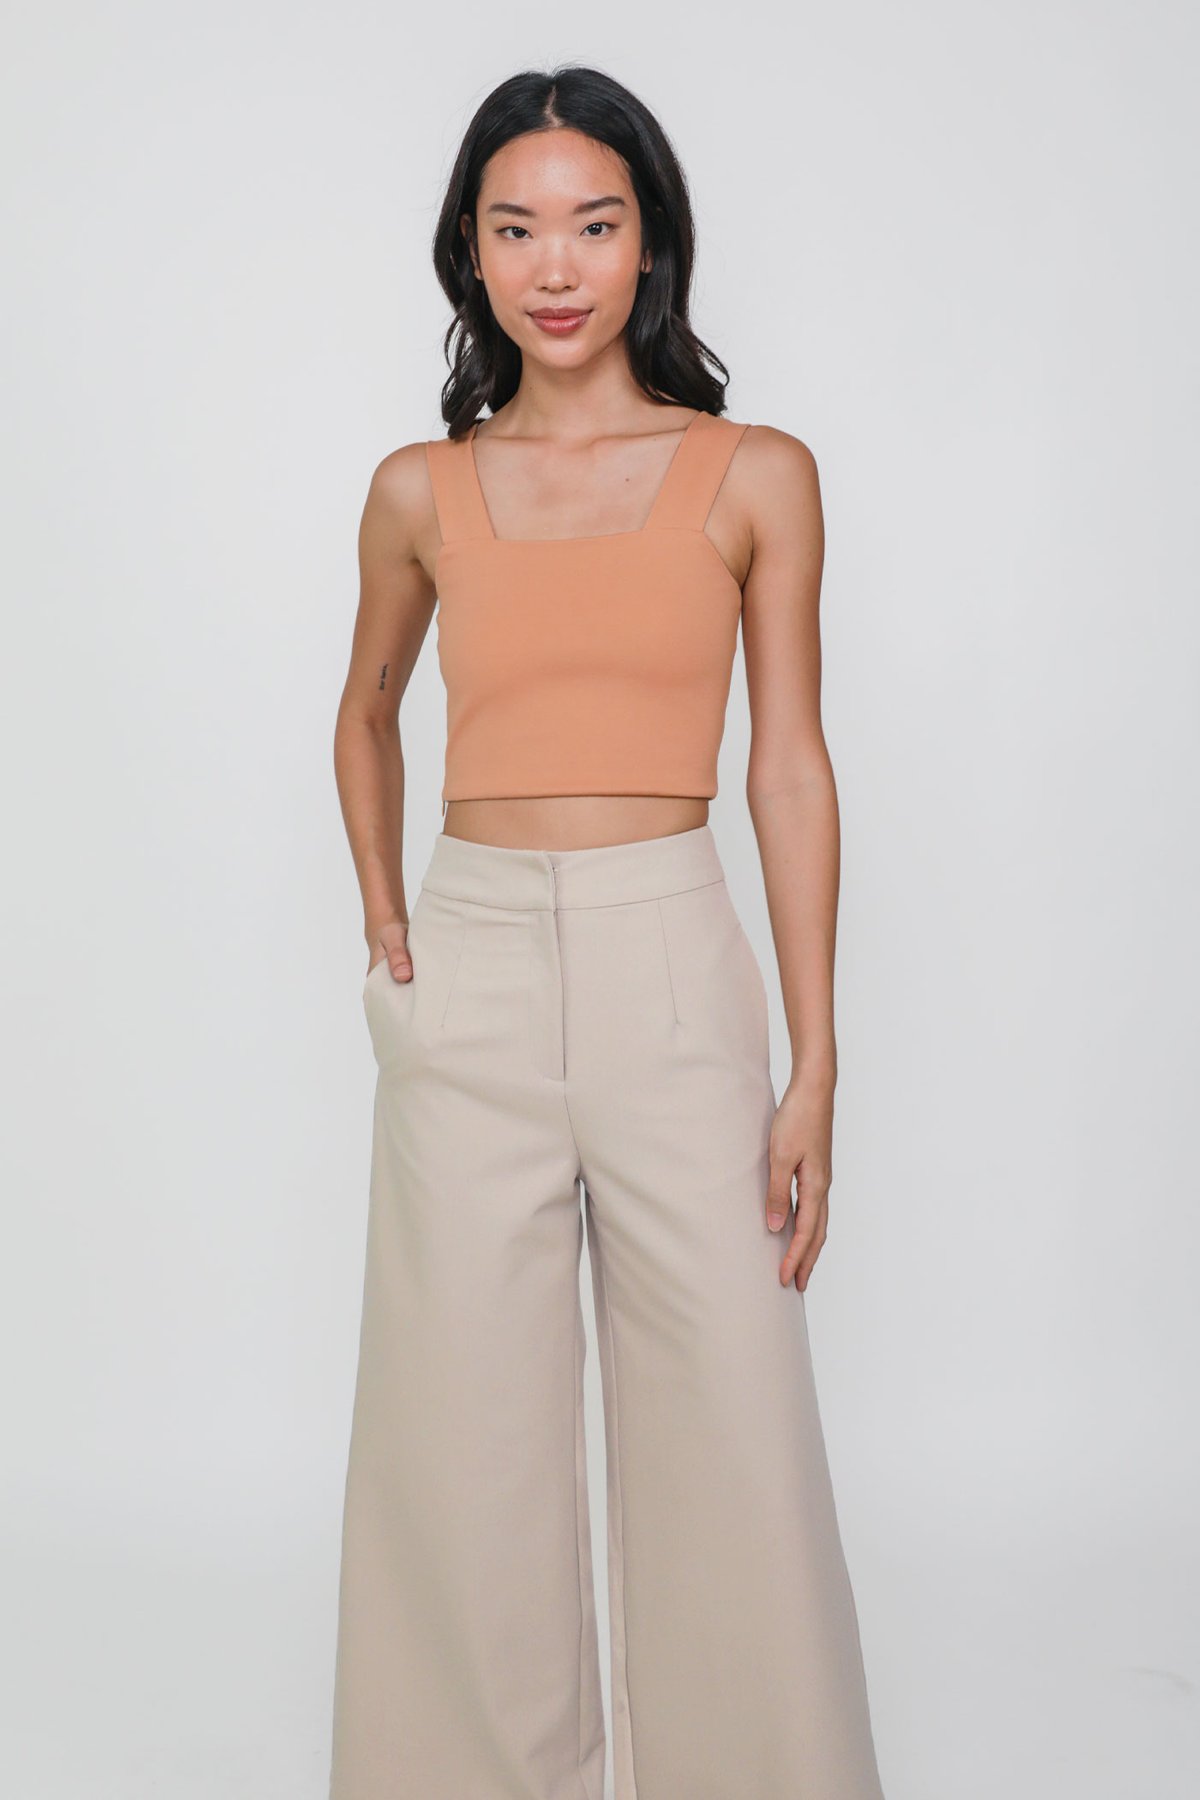 Abby Basic Crop Top (Apricot)